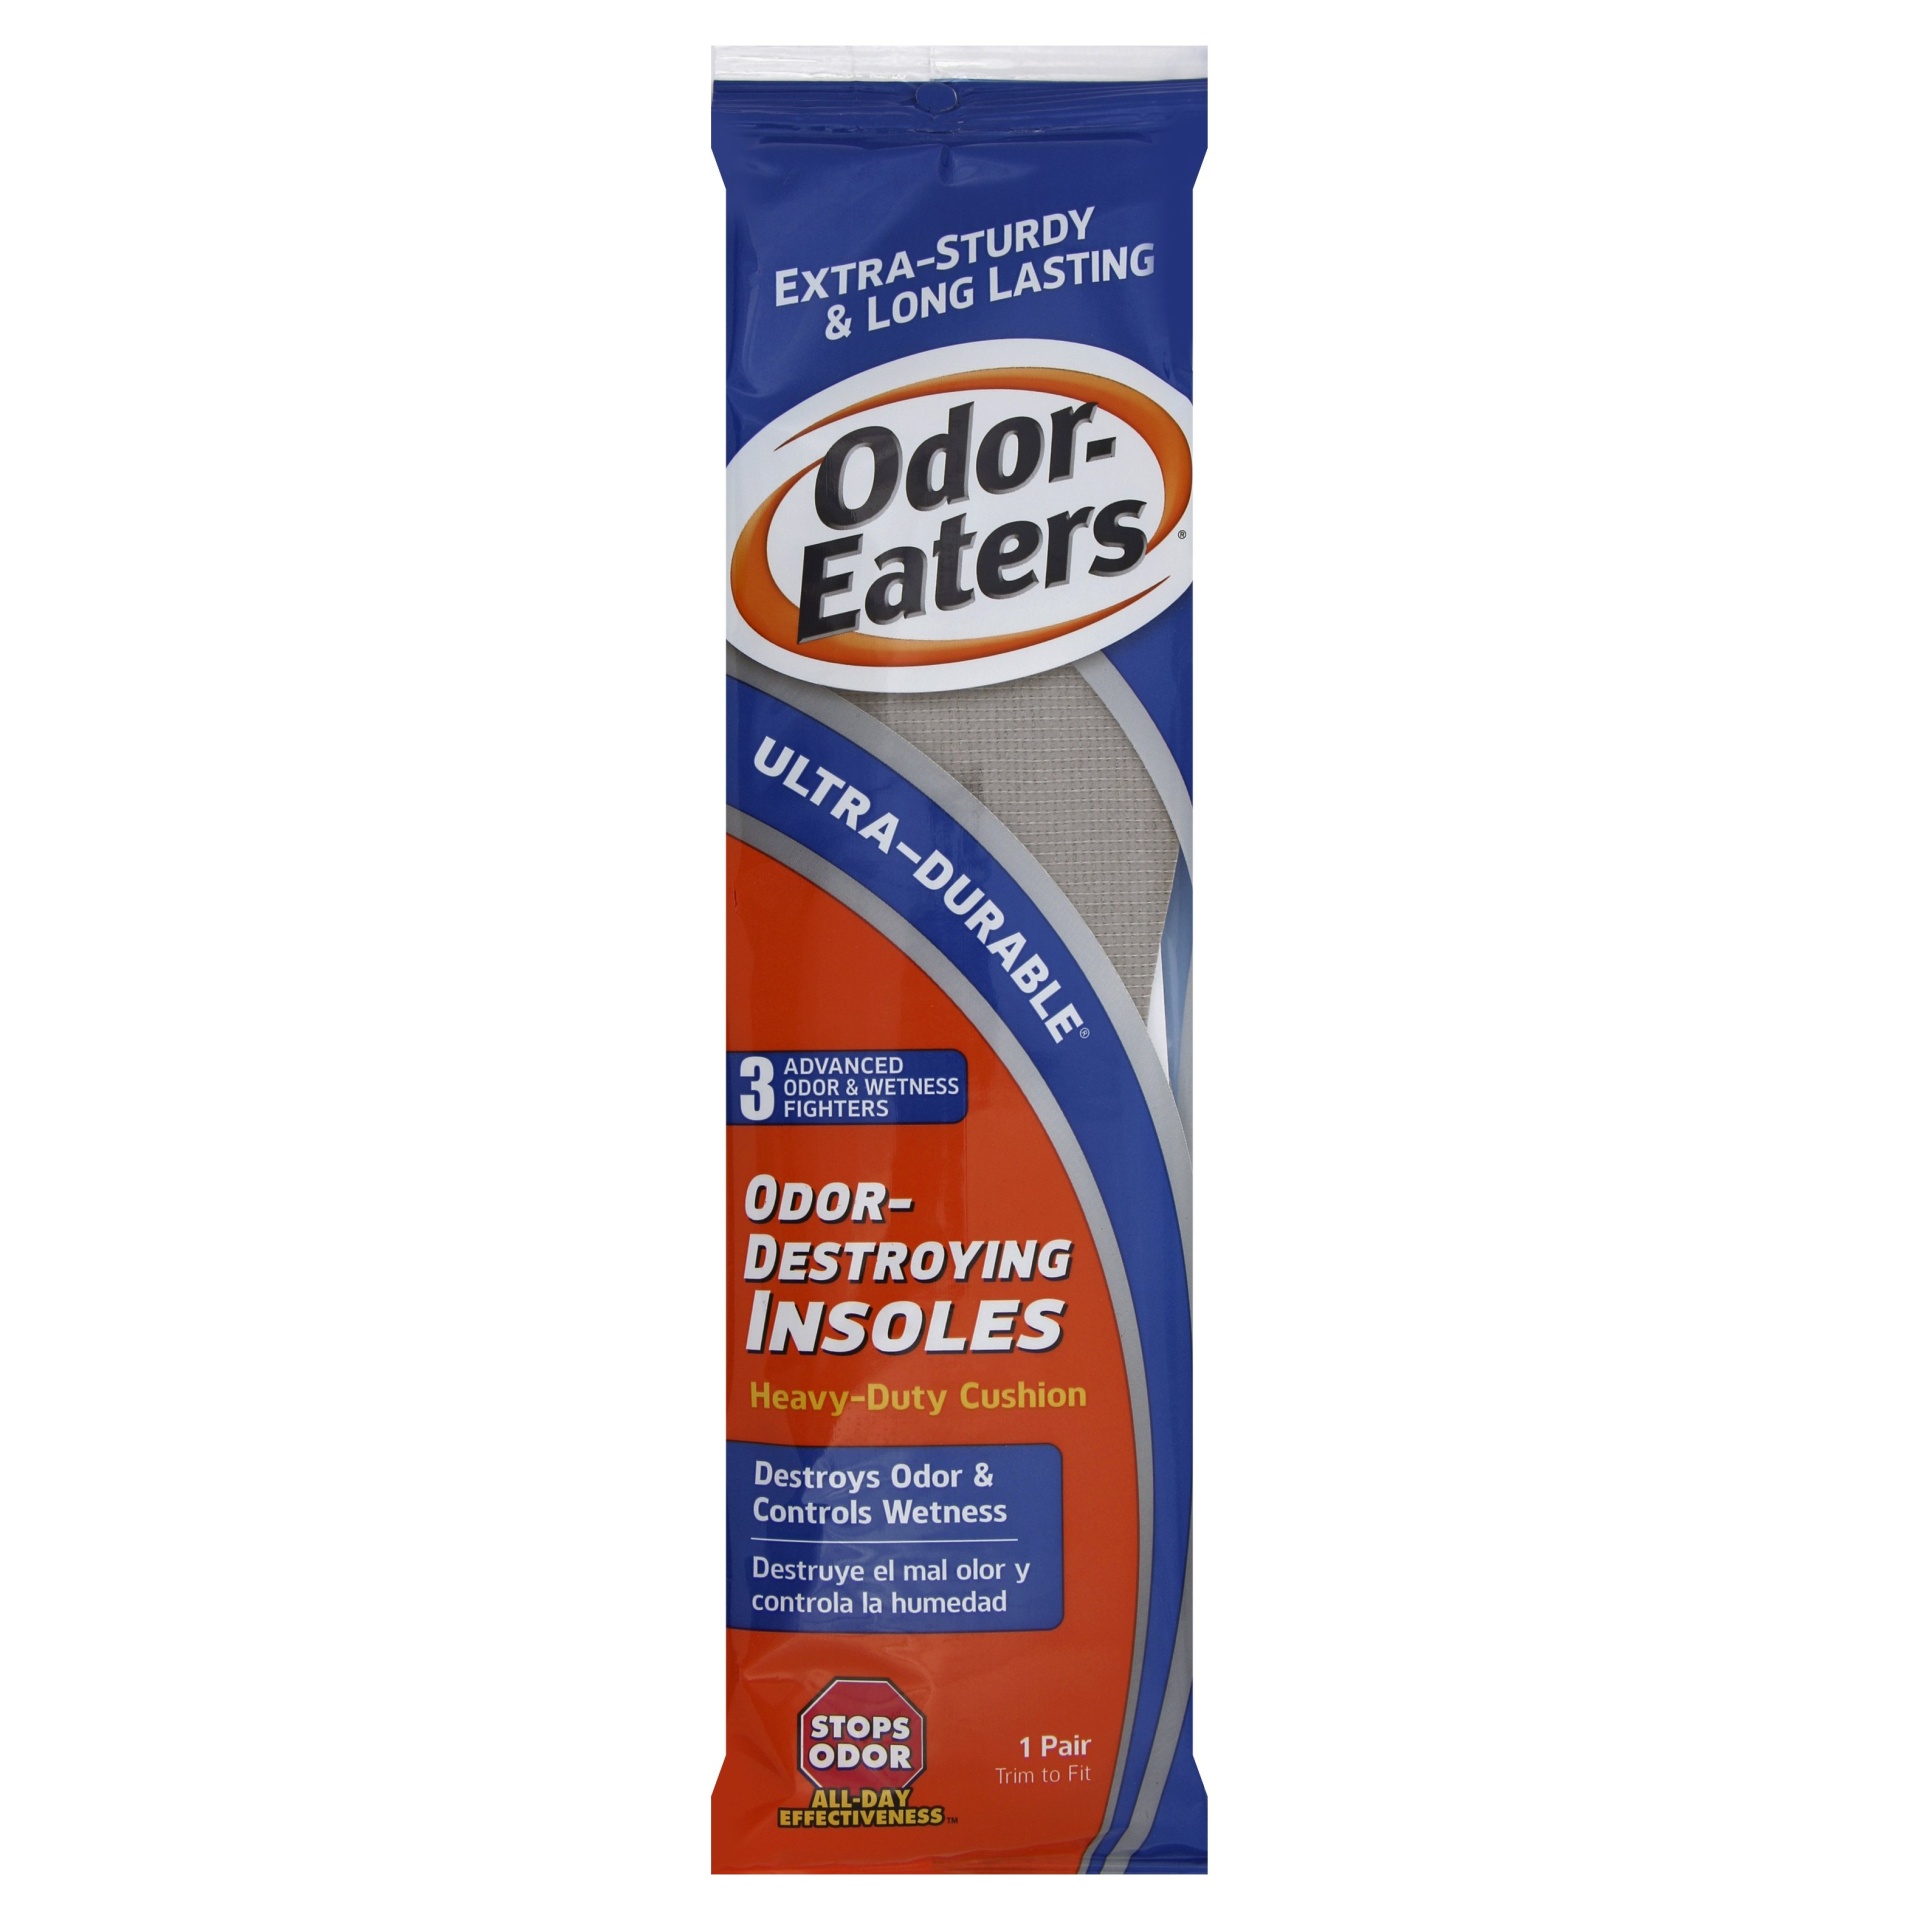 Odor-Eaters Ultra Durable Insoles Heavy Duty Cushion 55 ct | Shipt